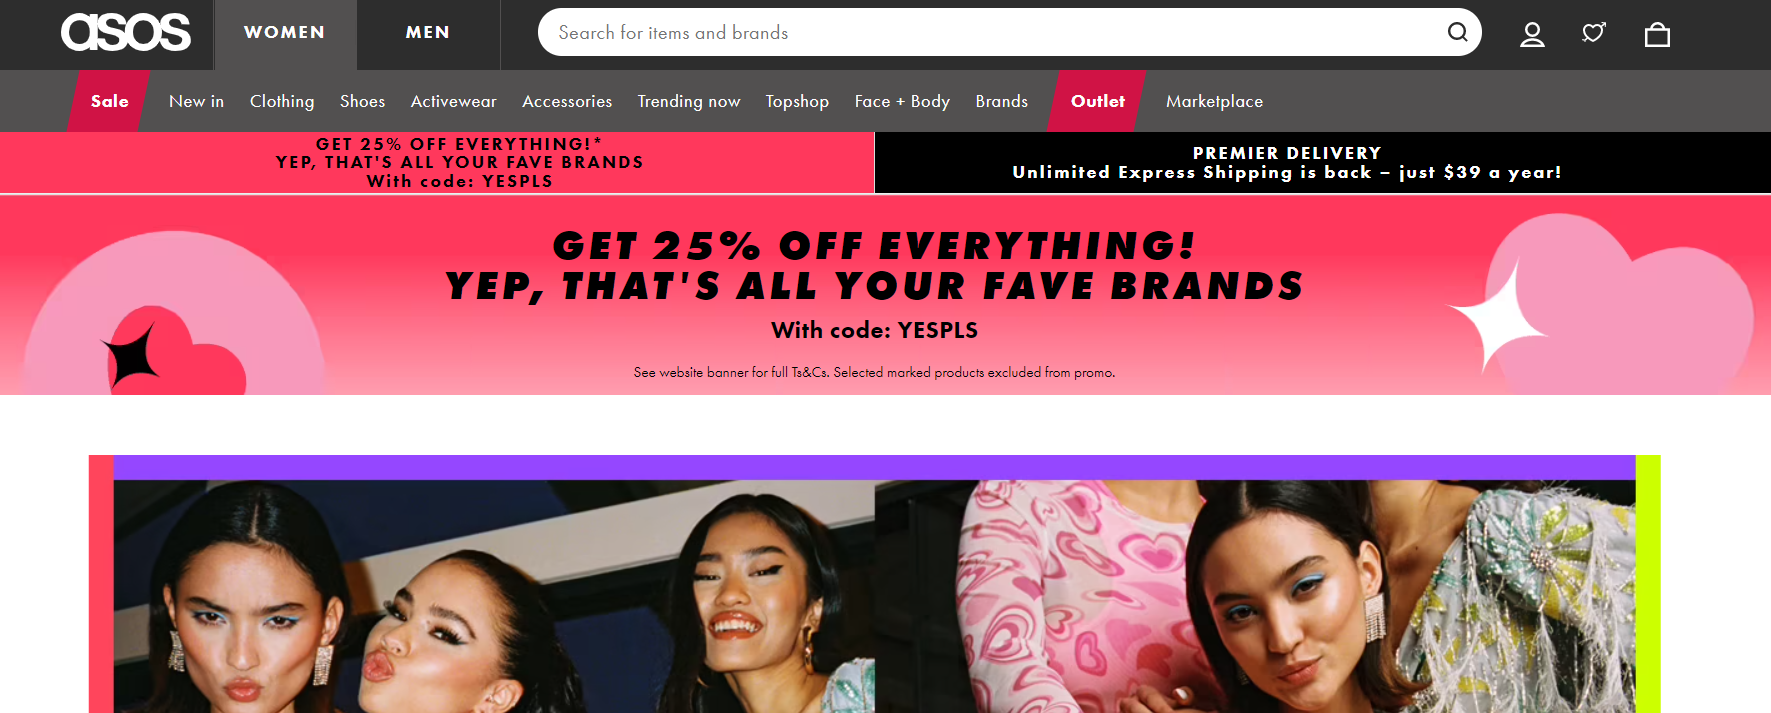 ASOS extra 25% OFF on everything for men & women styles with promo code